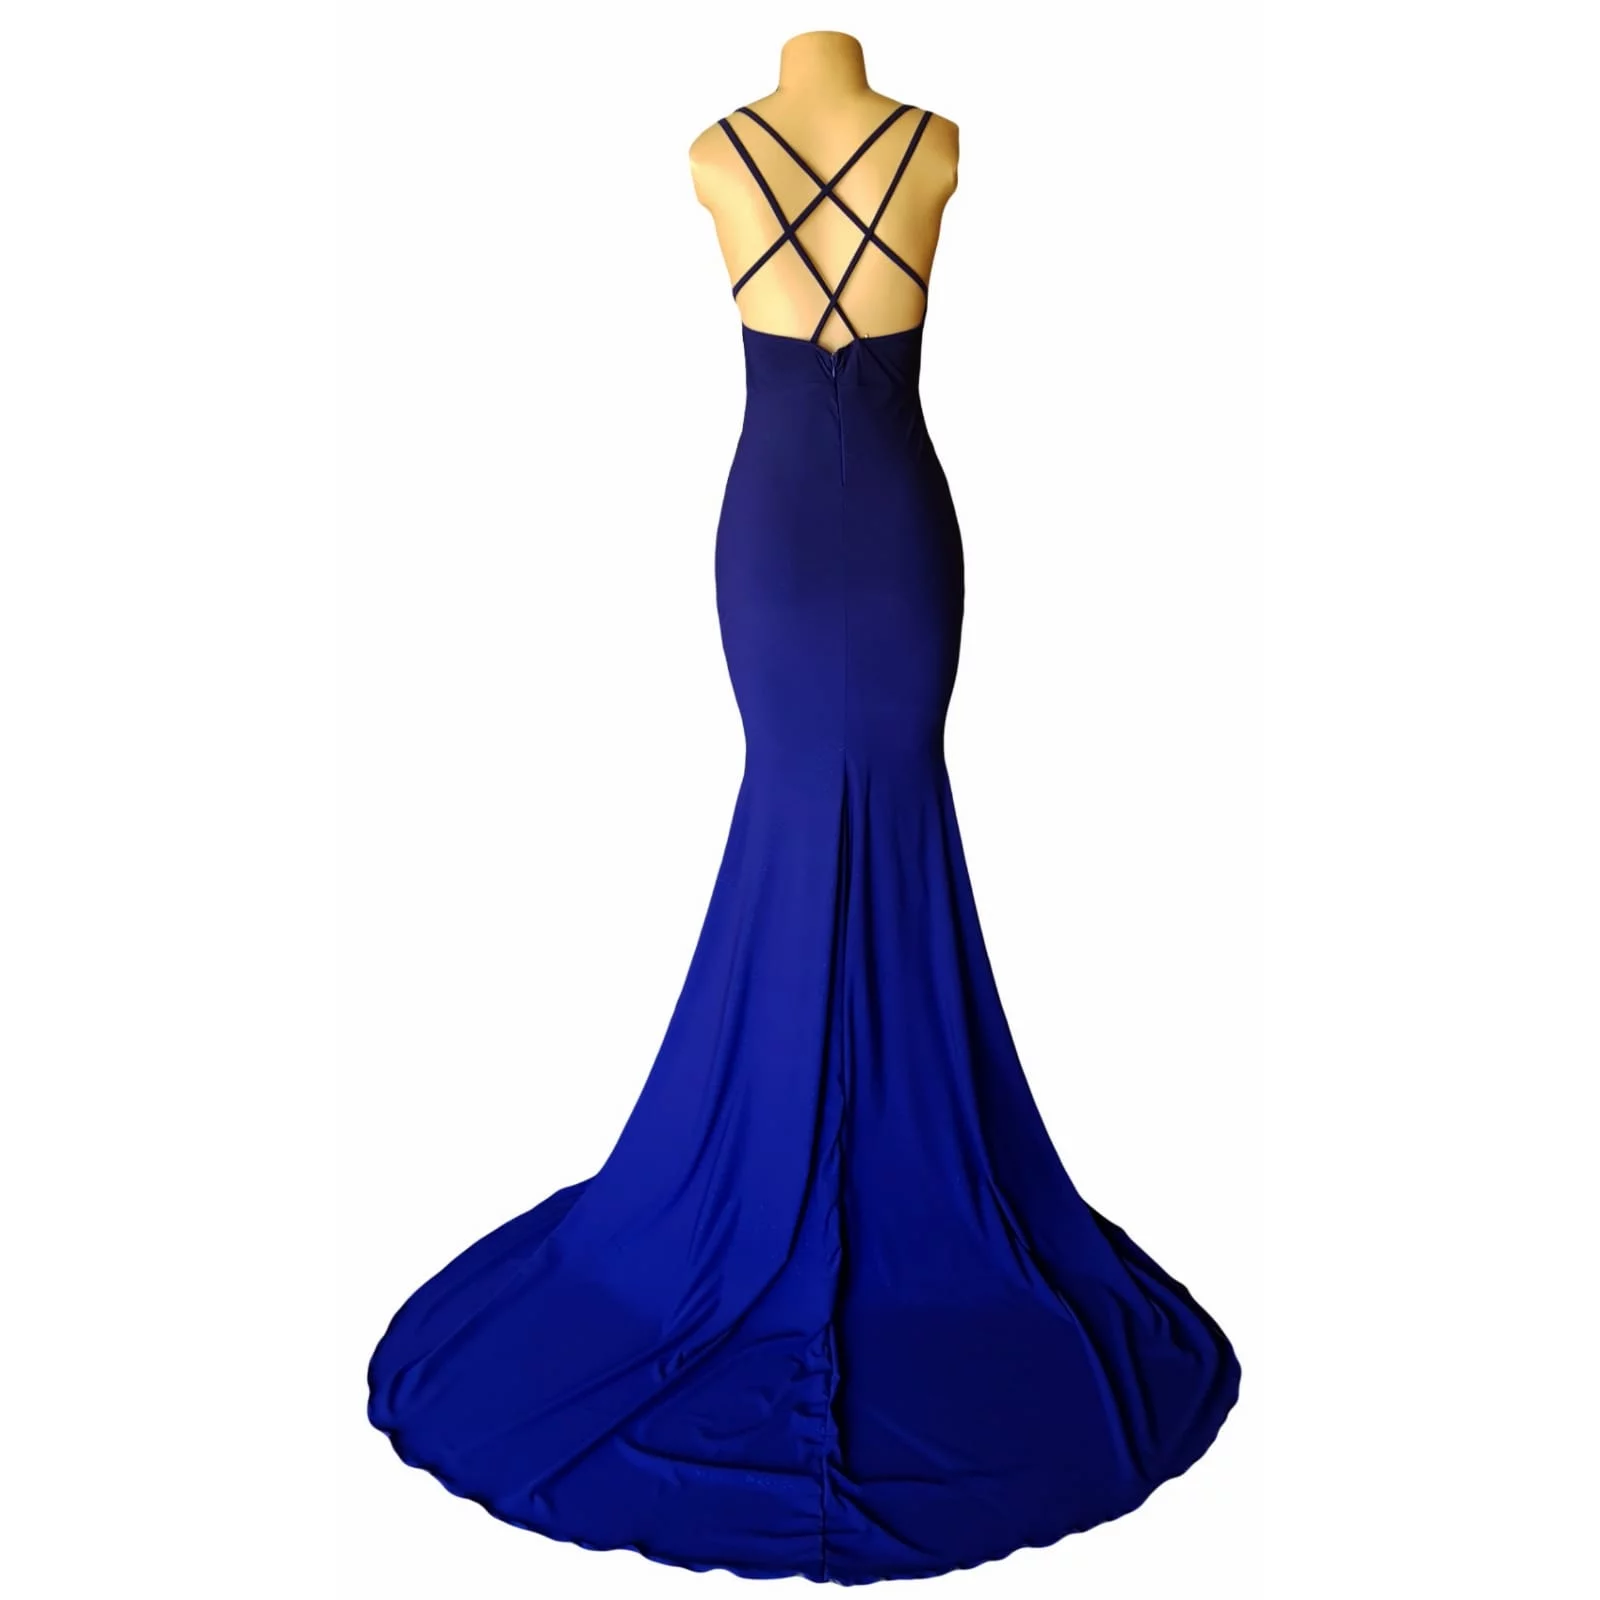 Royal blue soft mermaid cross busted prom dress 2 royal blue soft mermaid cross busted prom dress with an open back with crossed strap detail.